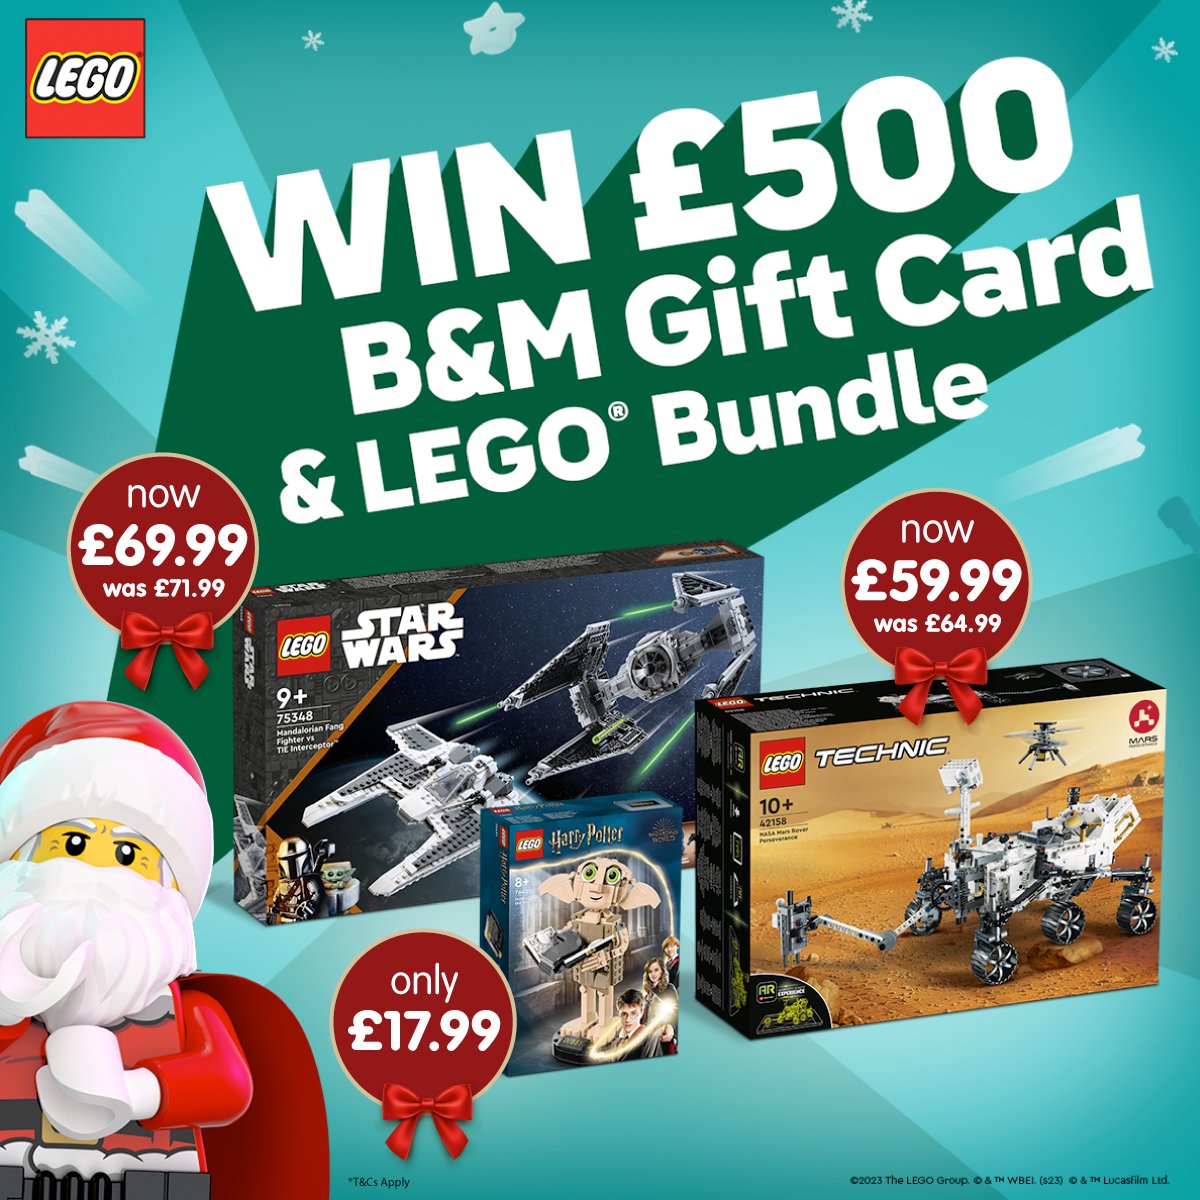 🎄🎅 #COMPETITION TIME 🎄🎅 It's the perfect time of year for LEGO - so we've teamed up to giveaway a £500 B&M Gift Card PLUS a LEGO bundle to ONE lucky winner! For a chance to #WIN, simply; 1) FOLLOW US 2) RT 3) COMMENT #BMLEGO Competition ends 9am 21/11/23